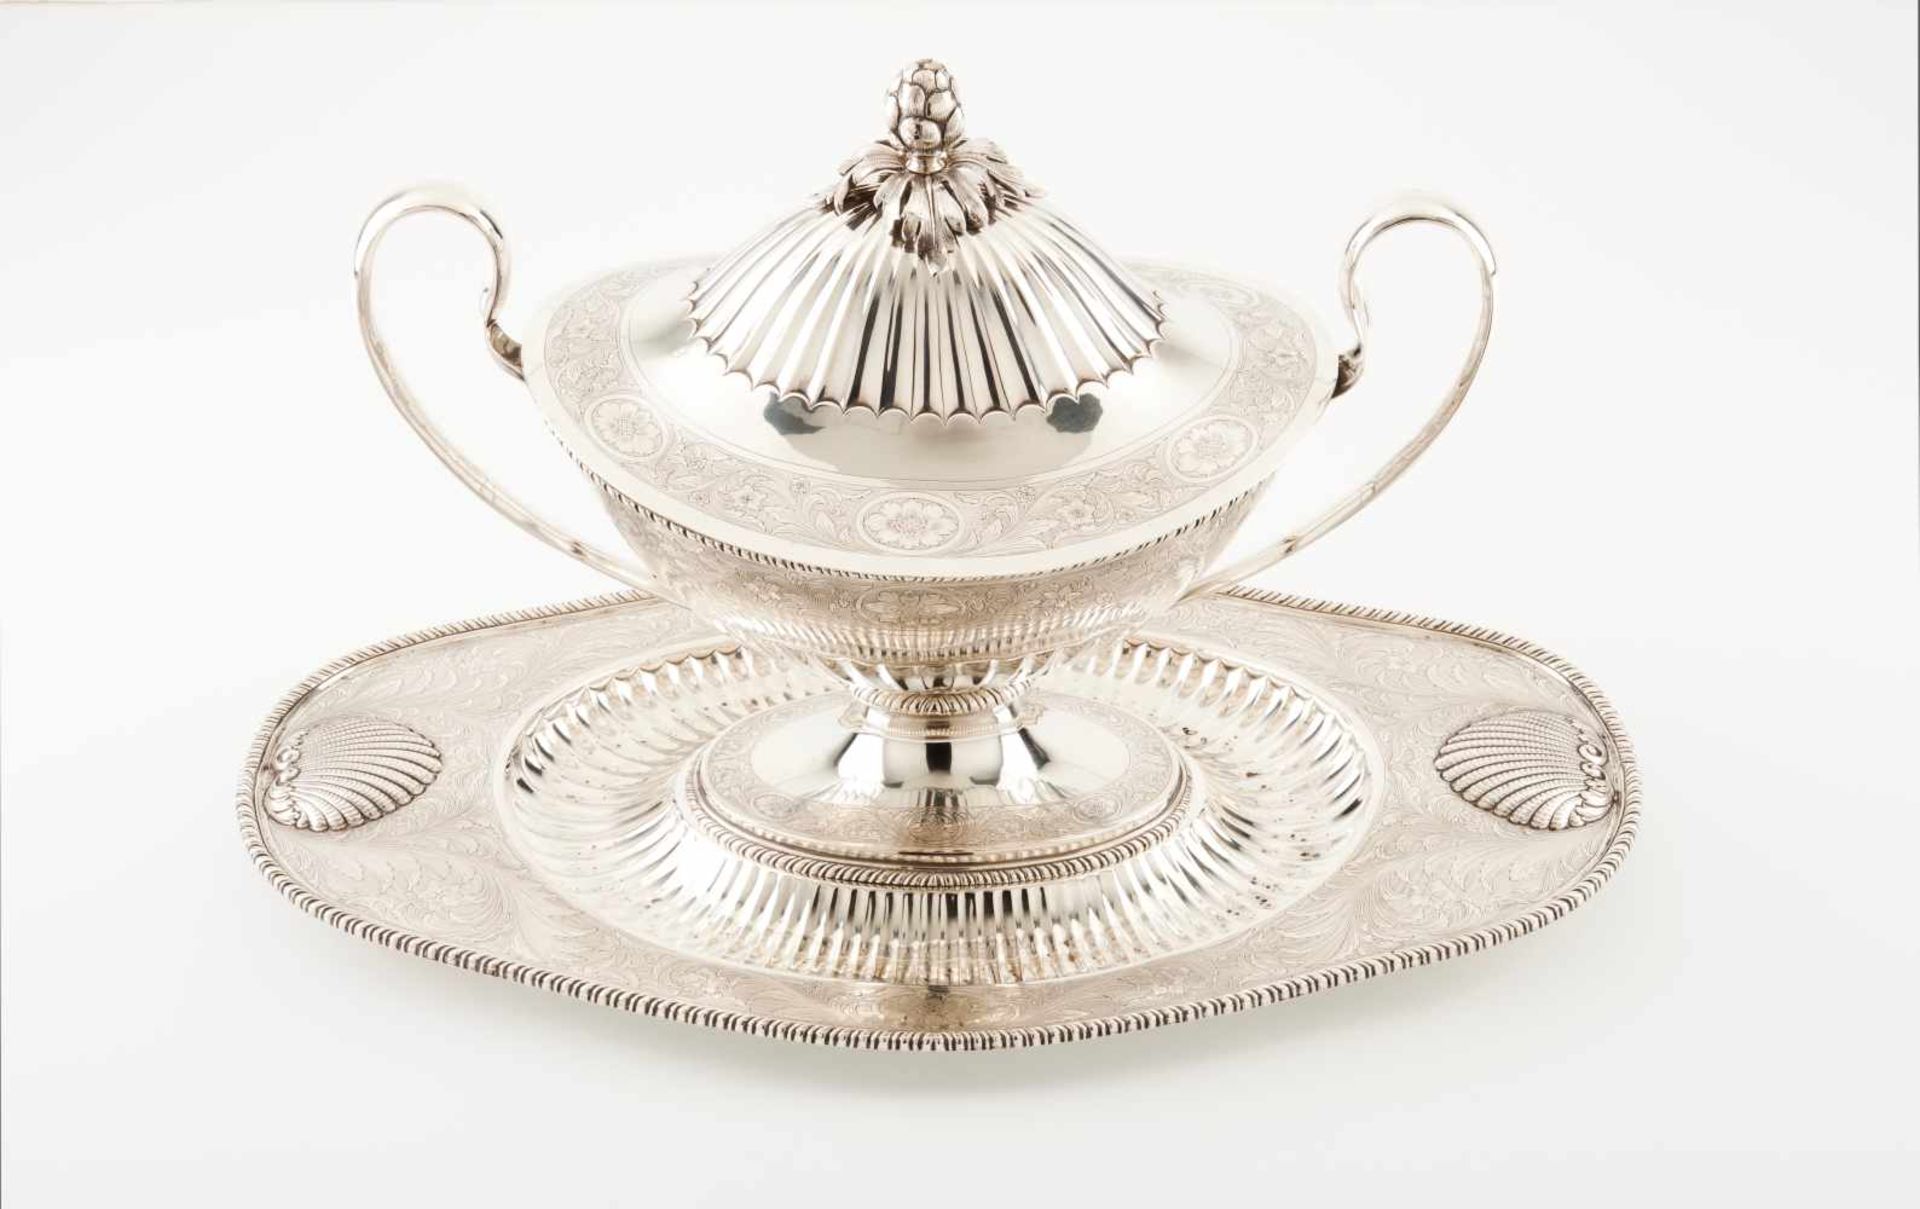 A large tureen and platterPortuguese chiselled silver with foliage scroll motifs. The platter with 2